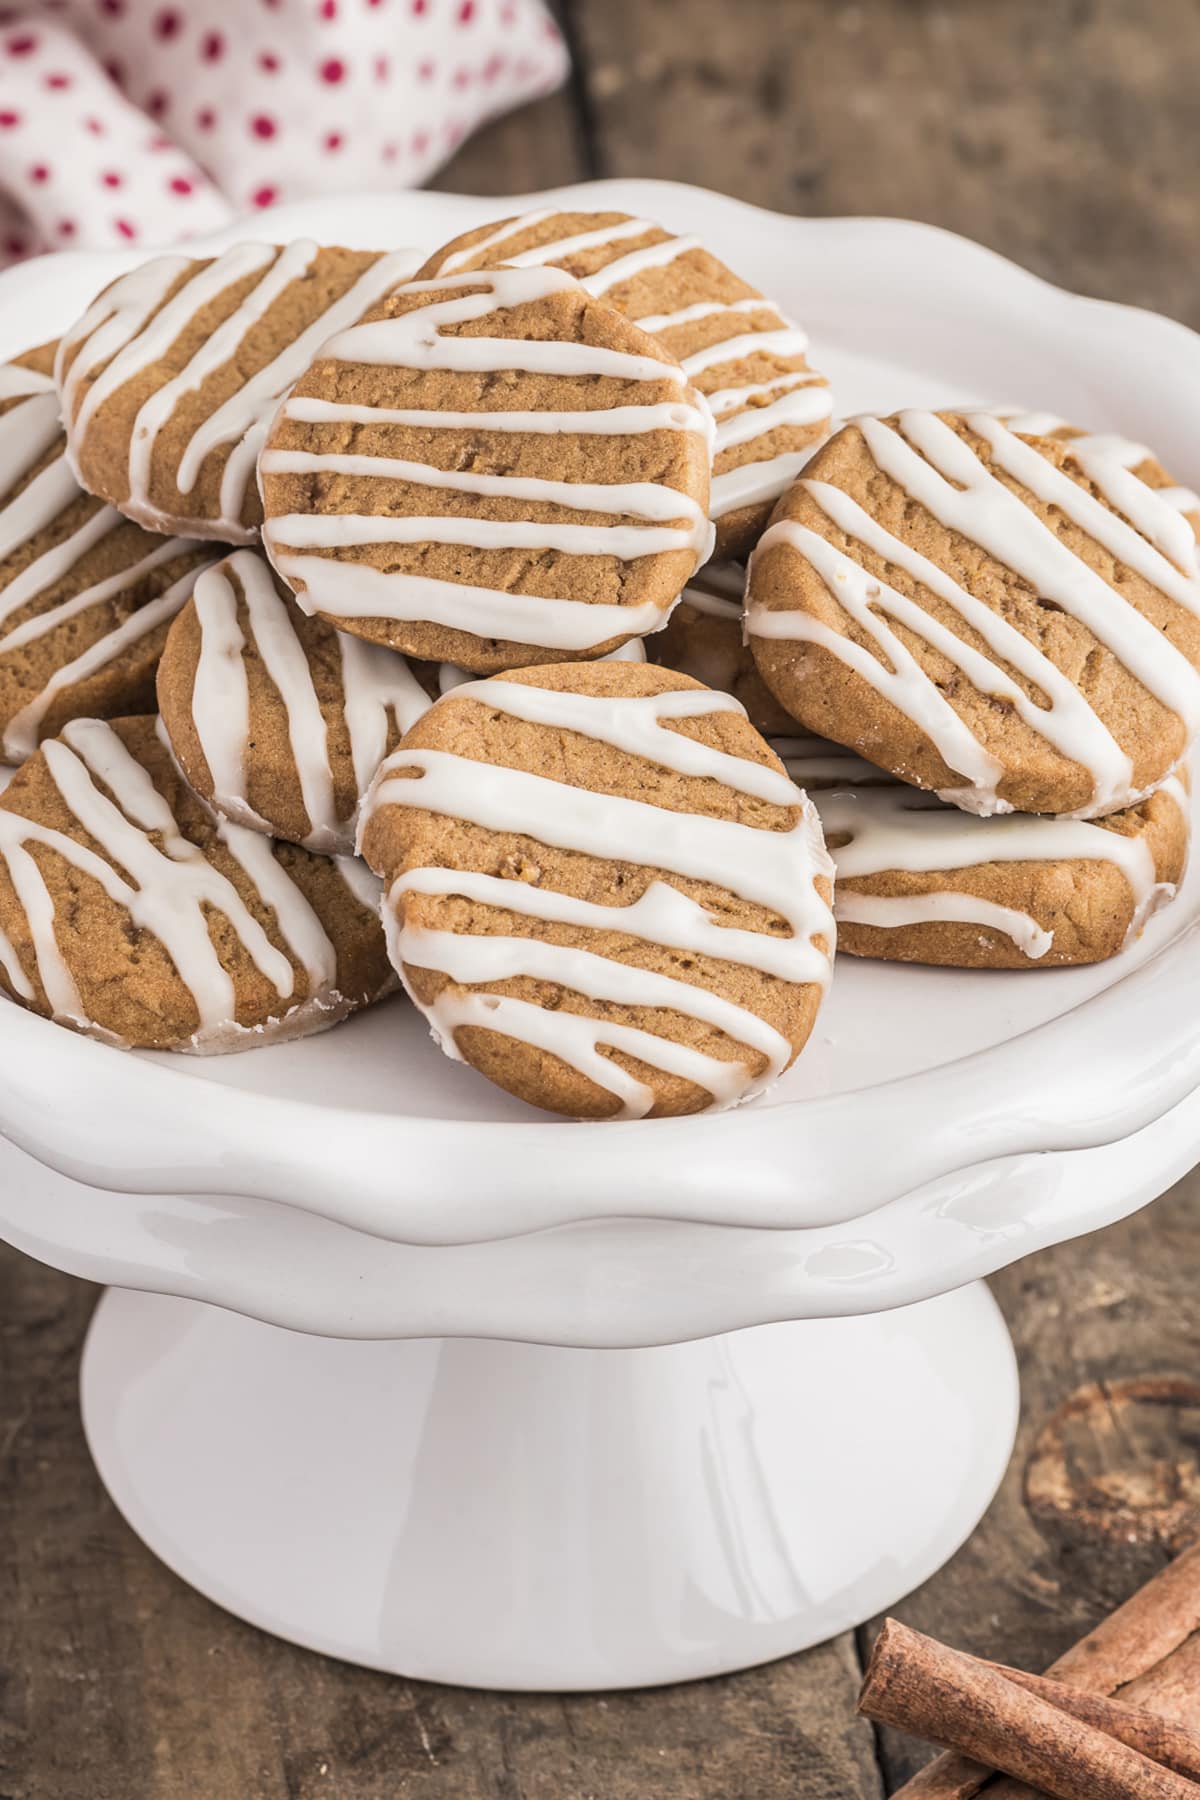 Slice and Bake Ginger Wafers